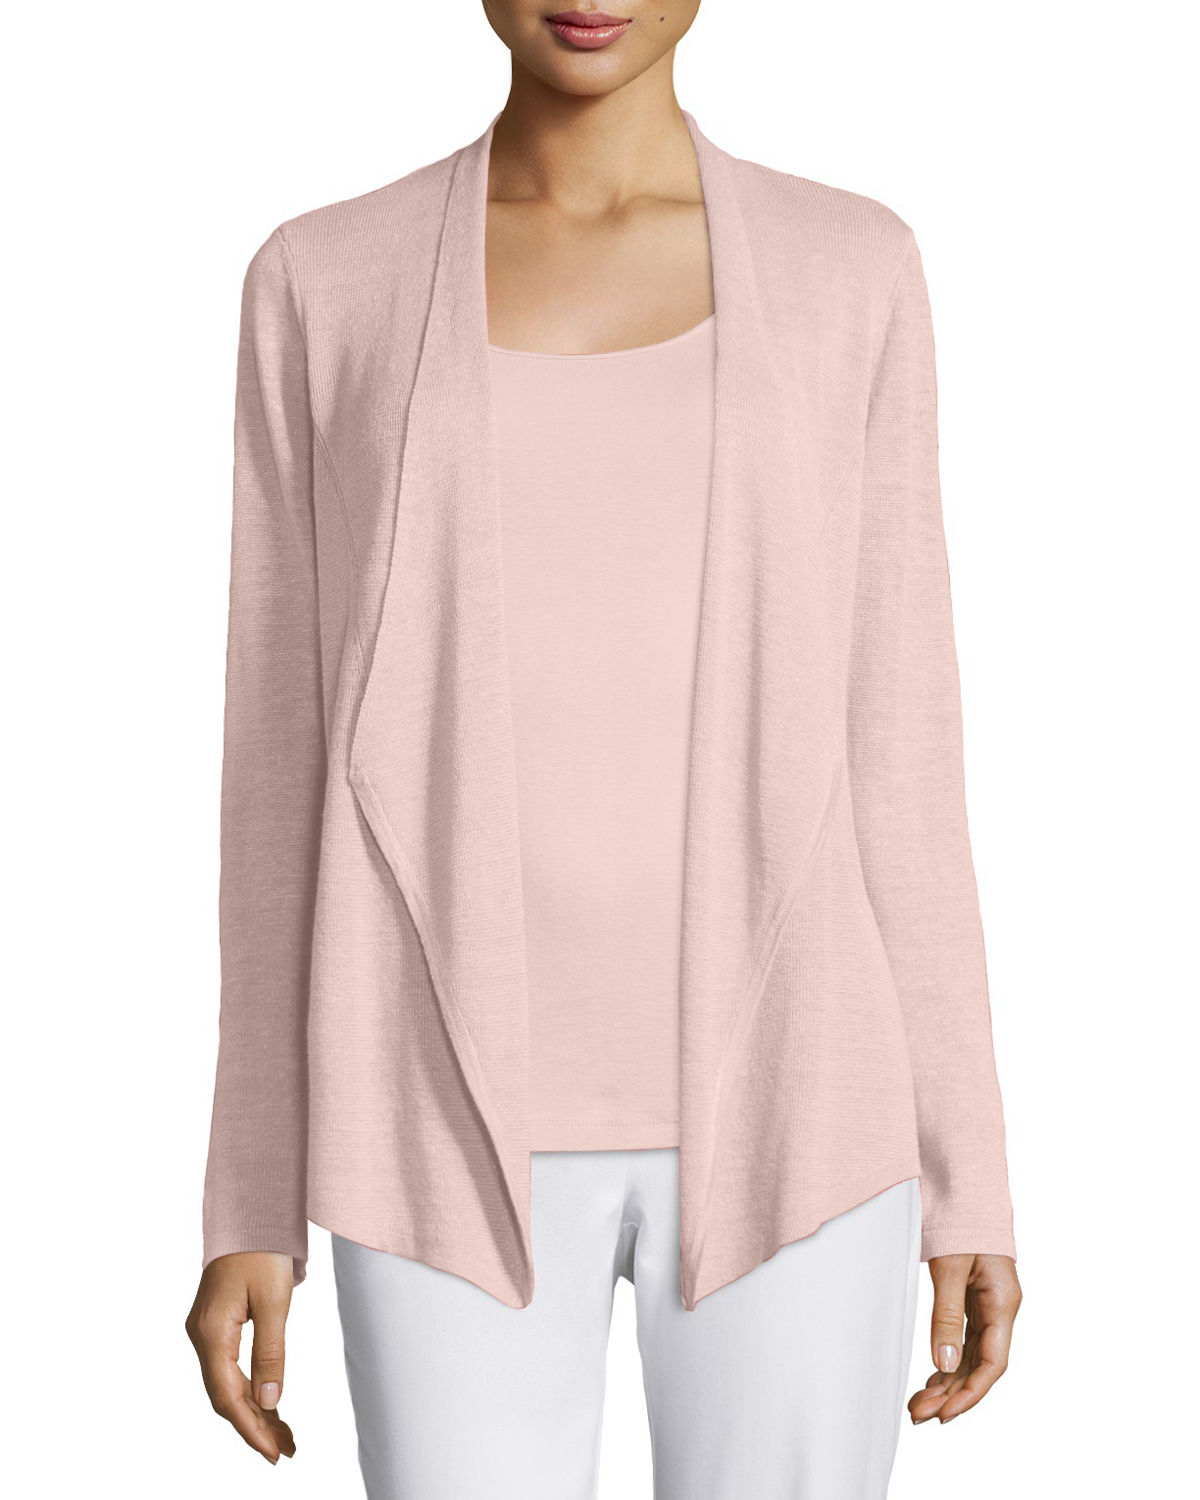 Eileen fisher Organic Linen Angled Cardigan in Pink | Lyst